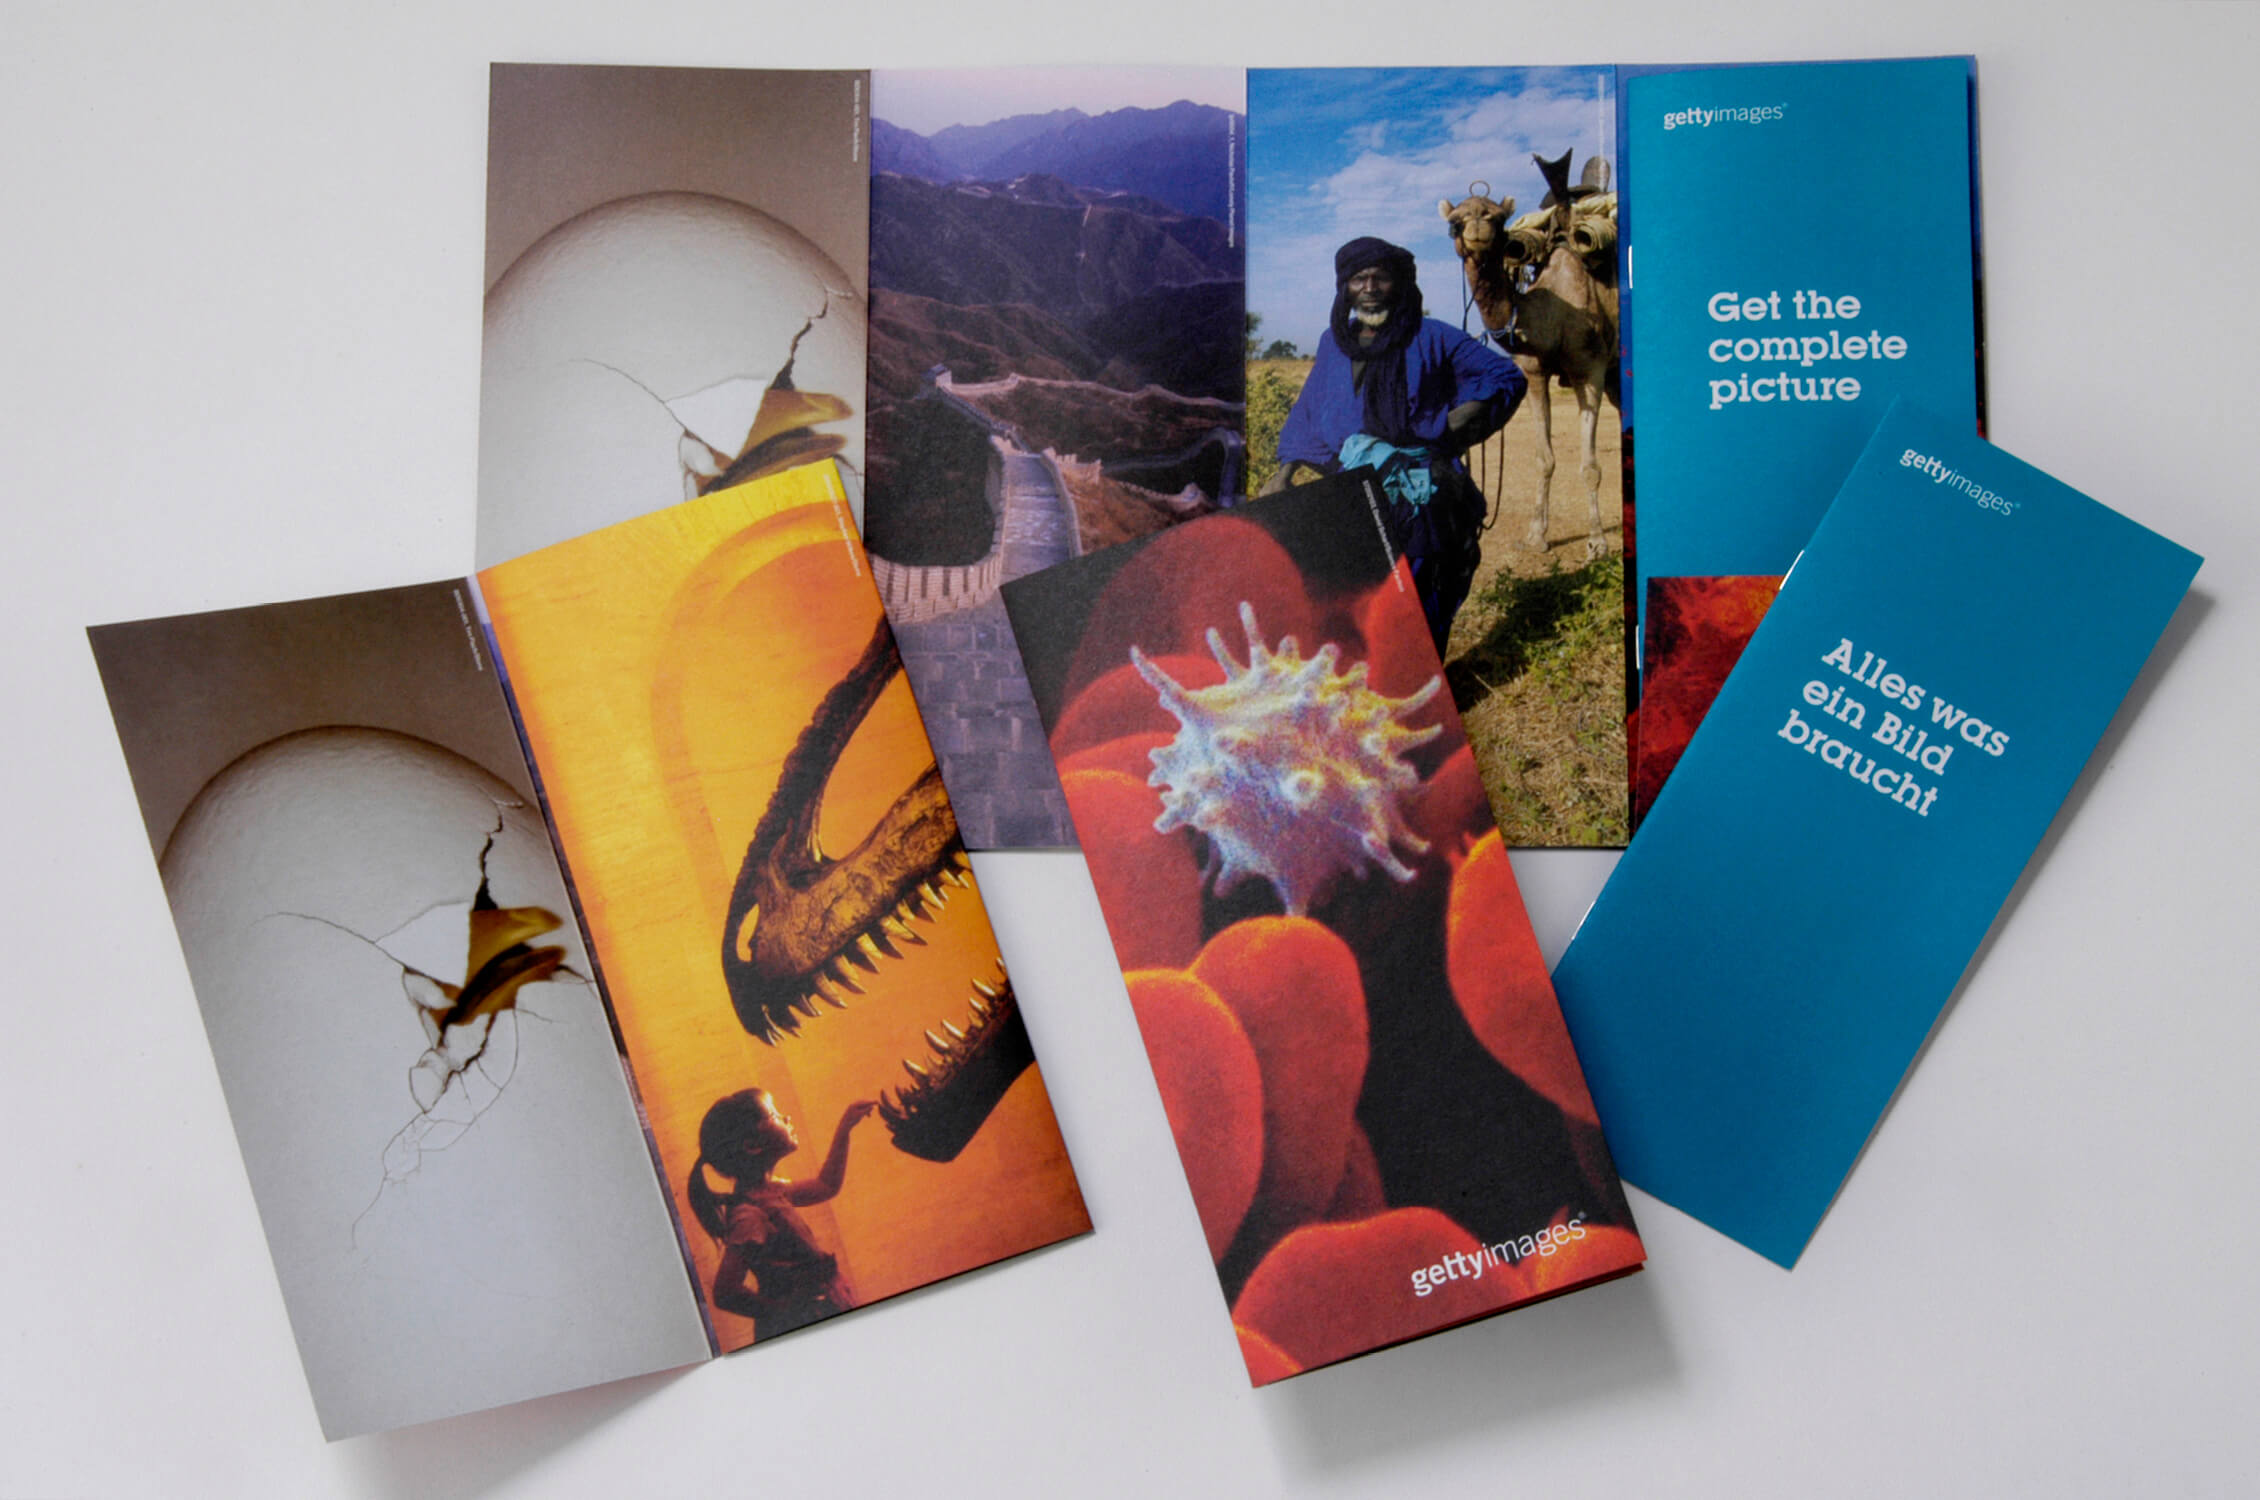 getty images direct mail complete picture image